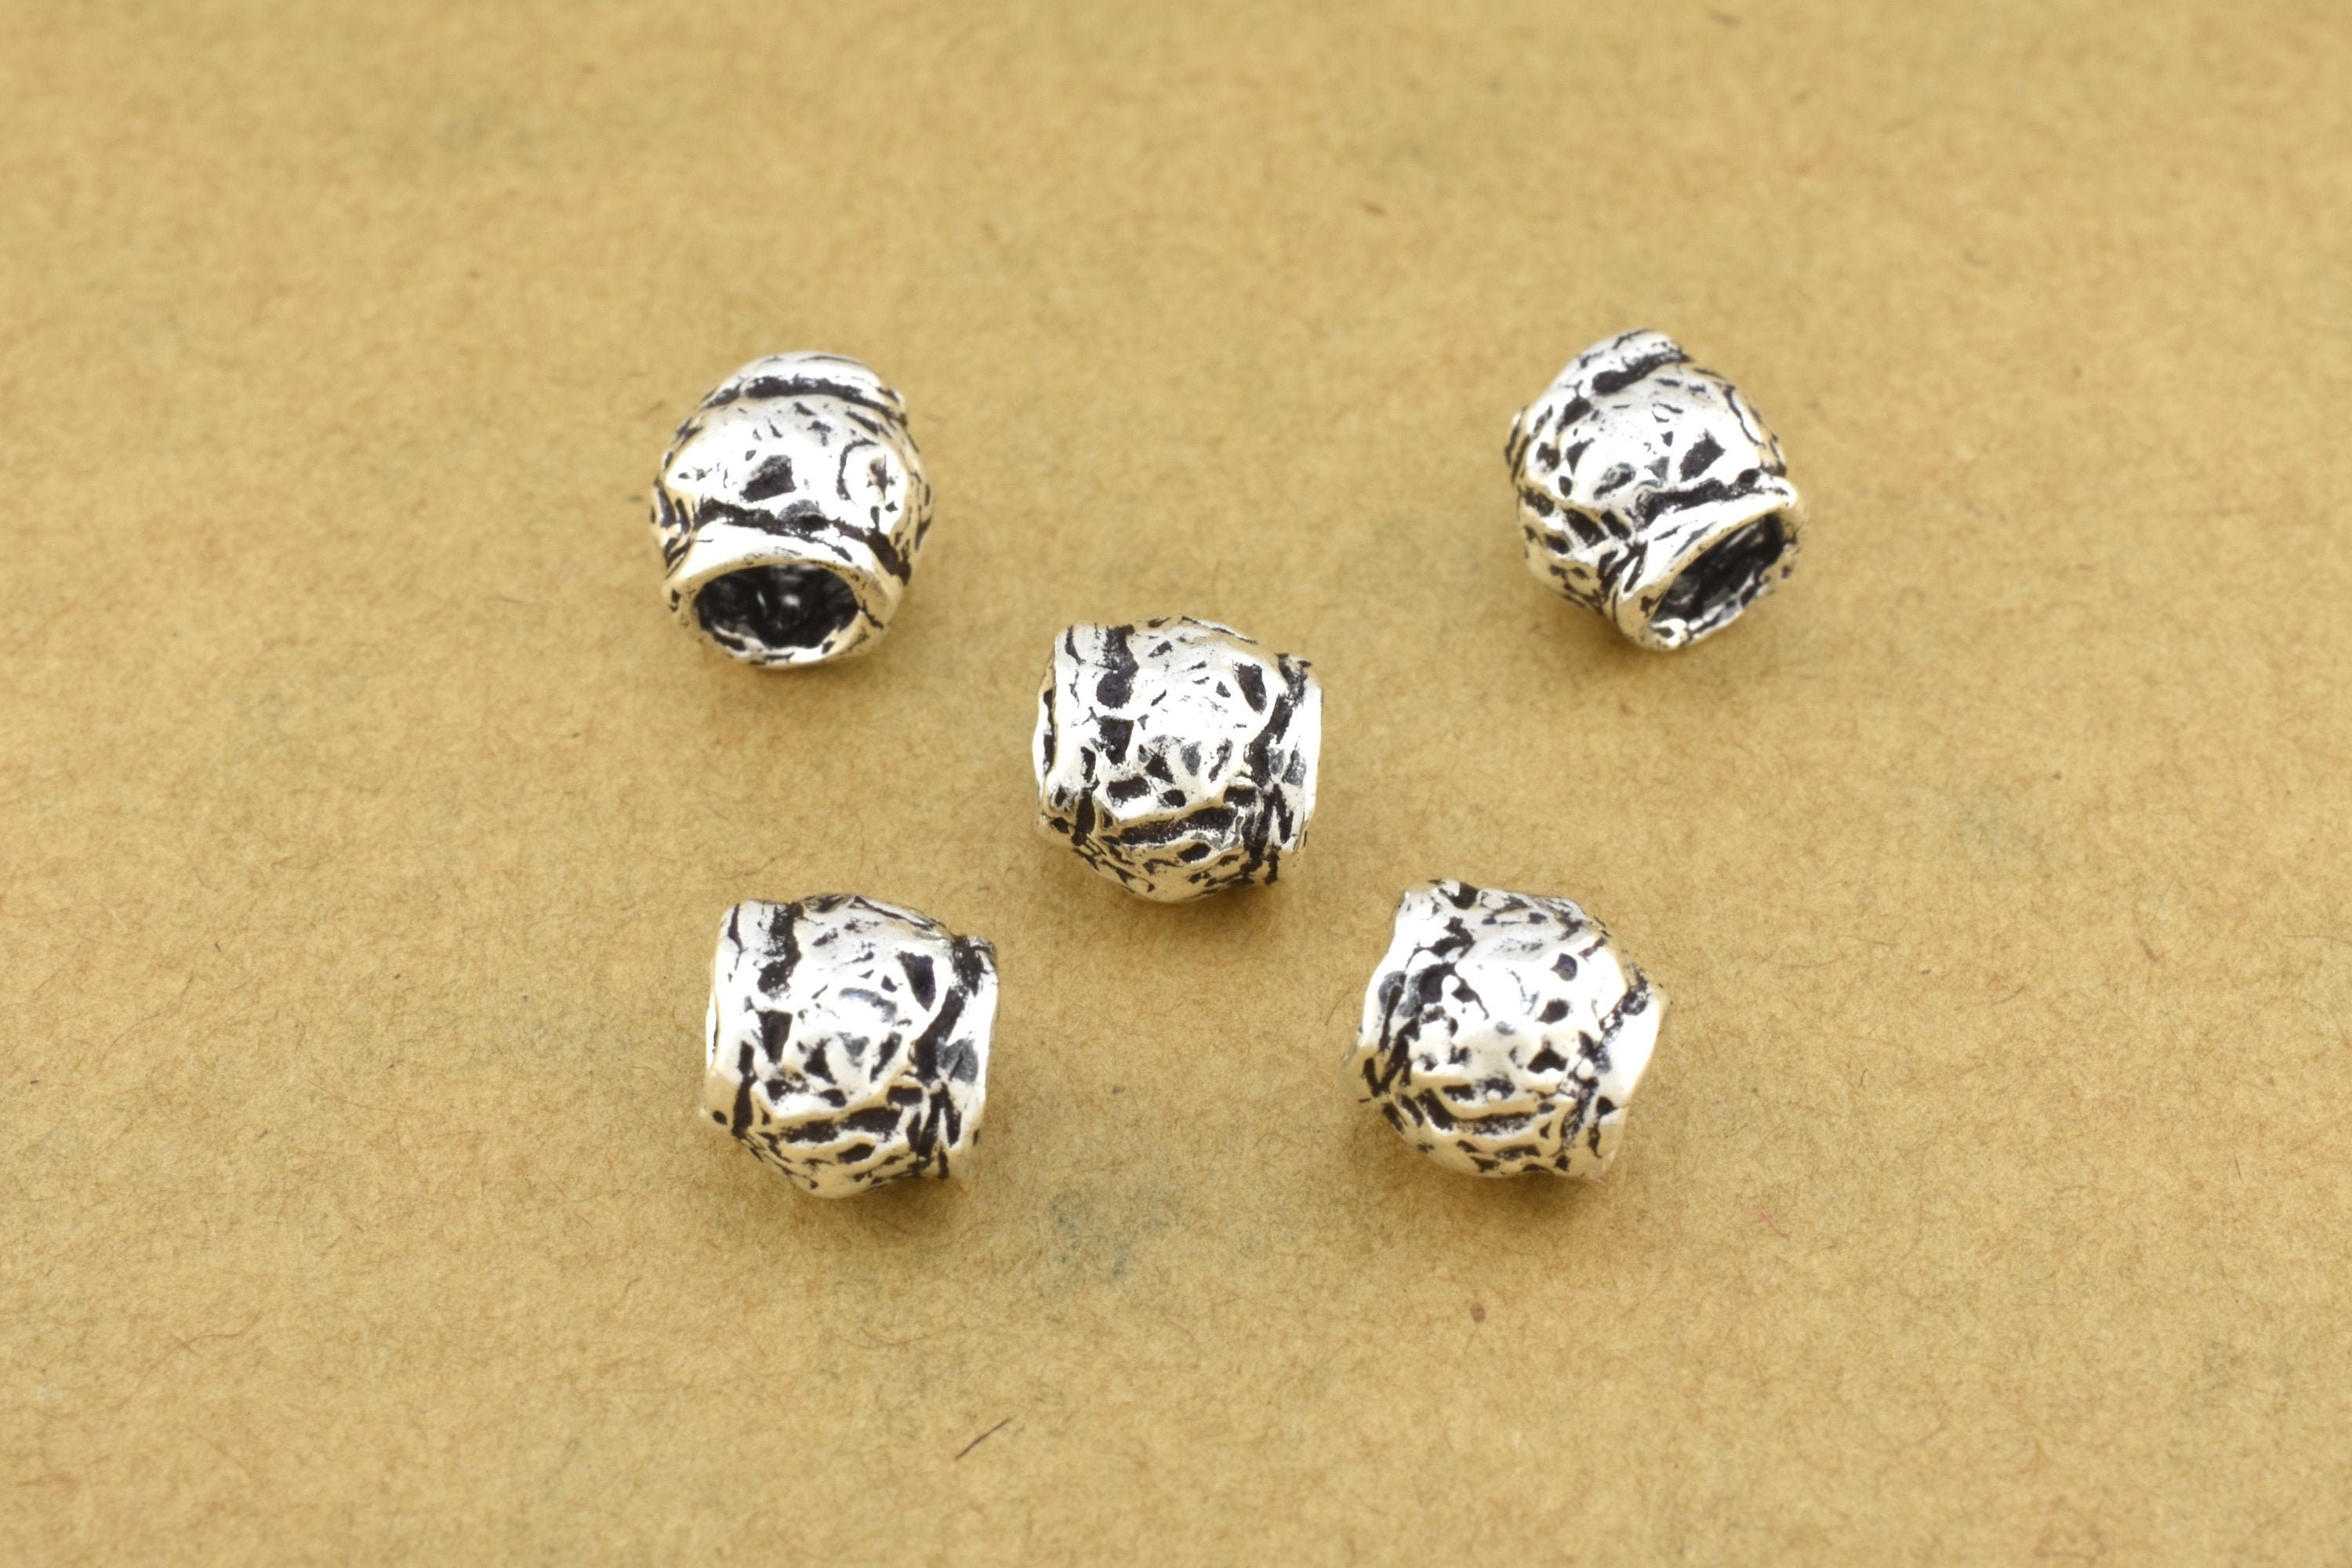 Silver Spacer Beads for Jewelry Making, 20 Pcs 6mm Silver Bali Beads, Shiny  Silver Plated Beads, Spacers for Jewelry 